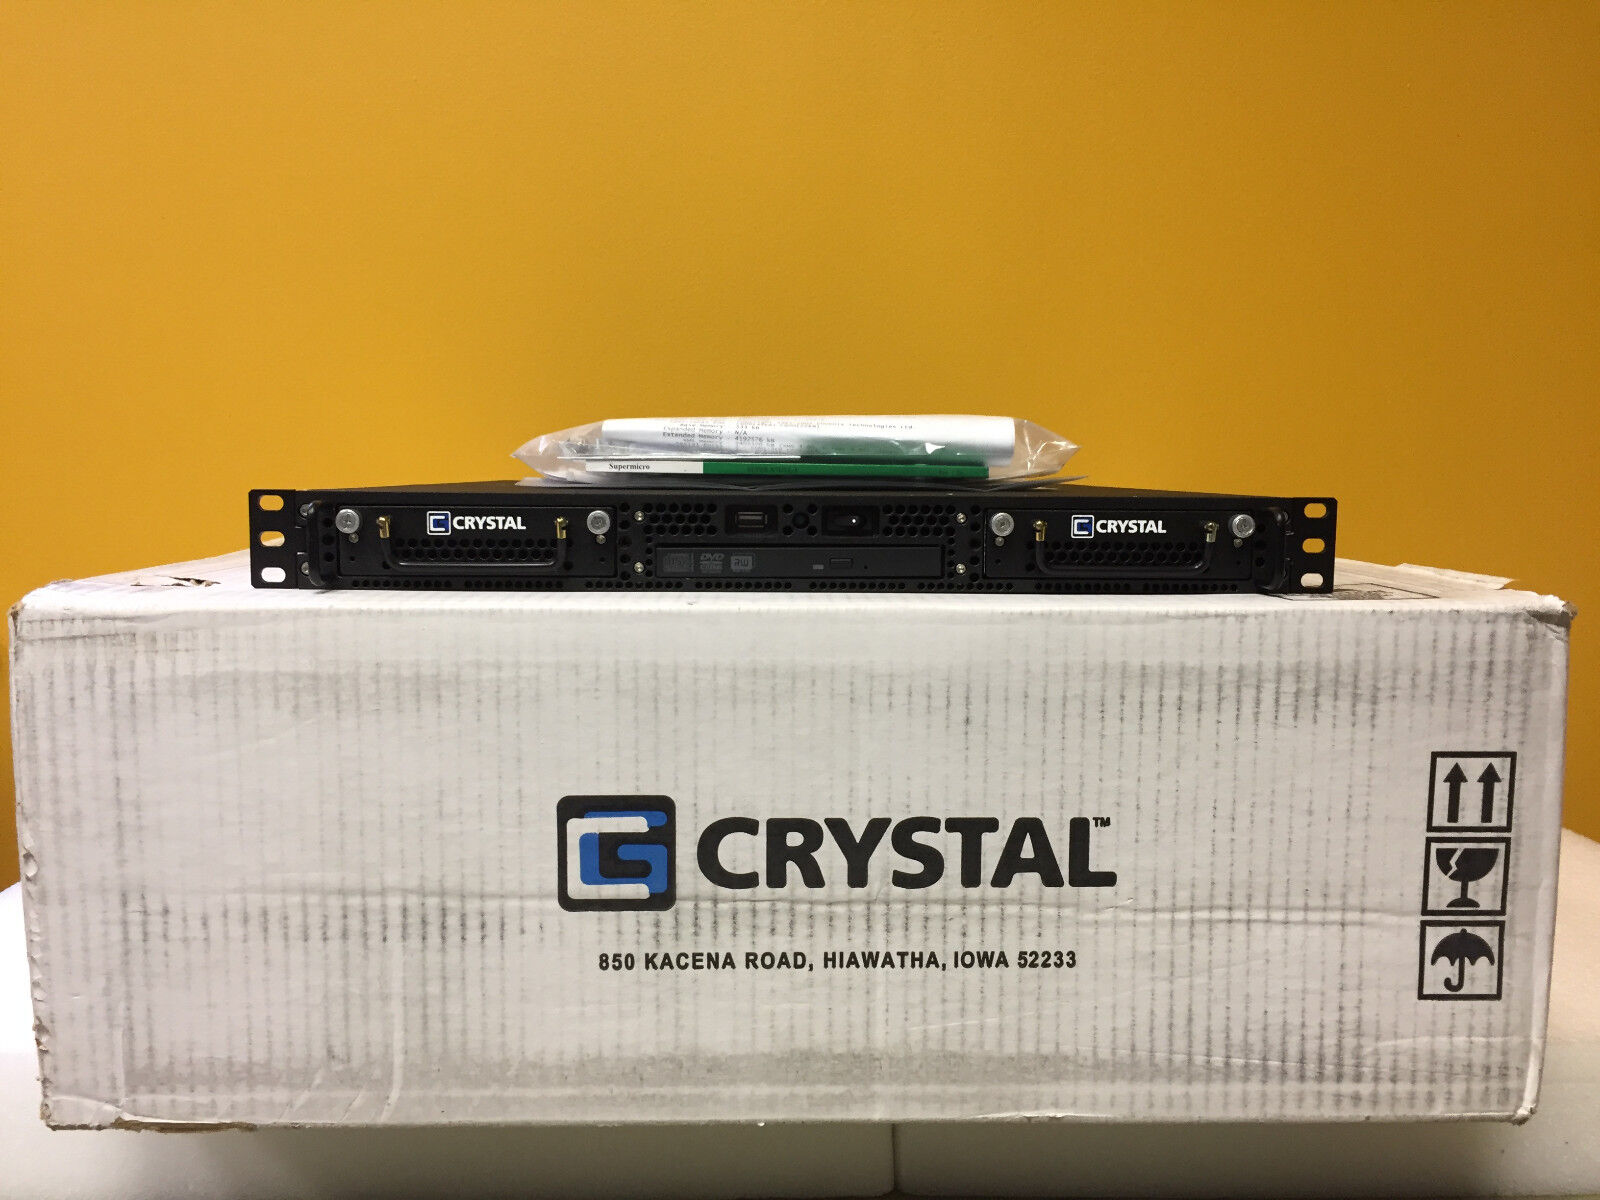 Crystal RS112 Intel Xeon E5440 2.83 GHz, 4 GB RAM, Rugged Server. New + Accy\'s